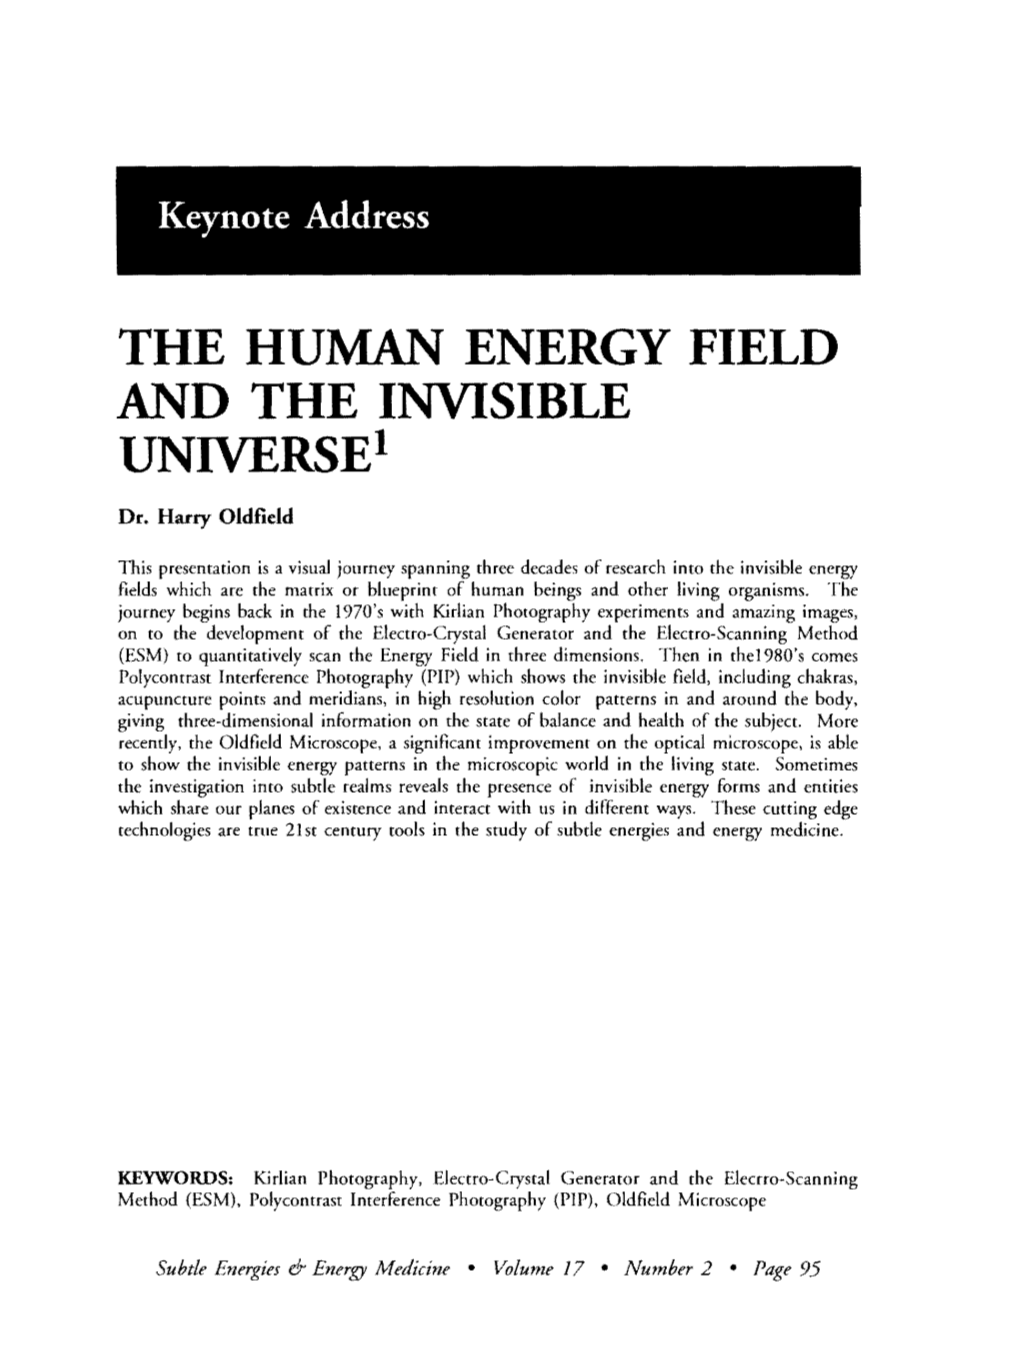 The Human Energy Field and the Invisible Universe!